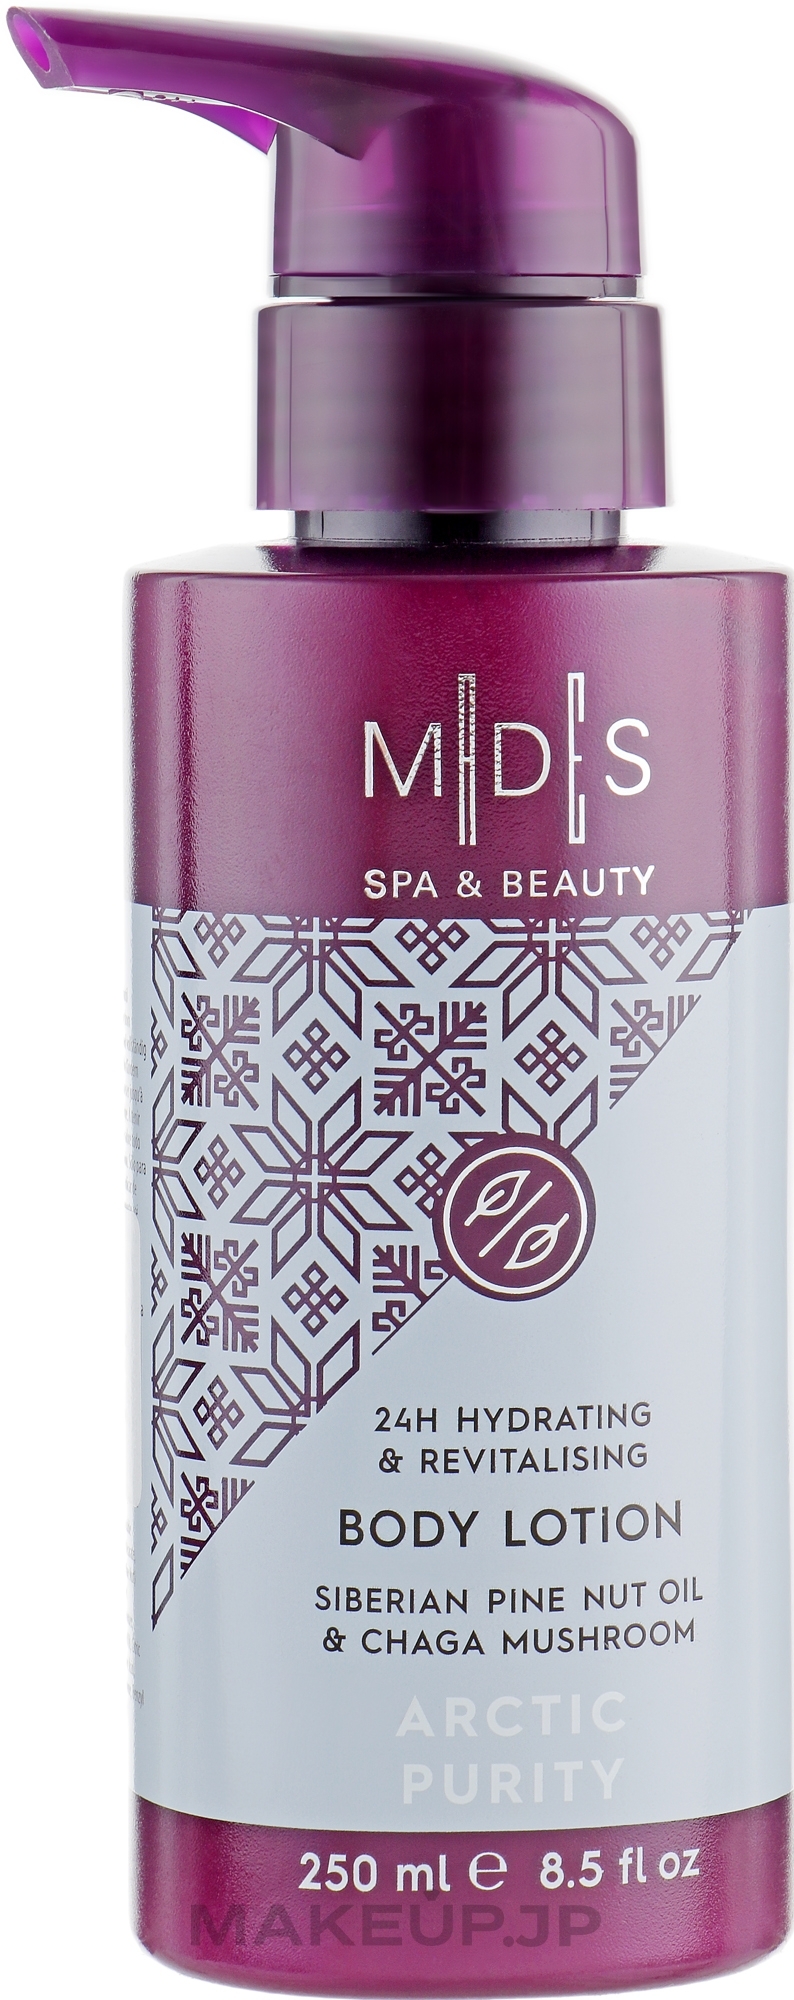 Arctic Purity Body Lotion - MDS Spa&Beauty Arctic Purity Body Lotion — photo 250 ml